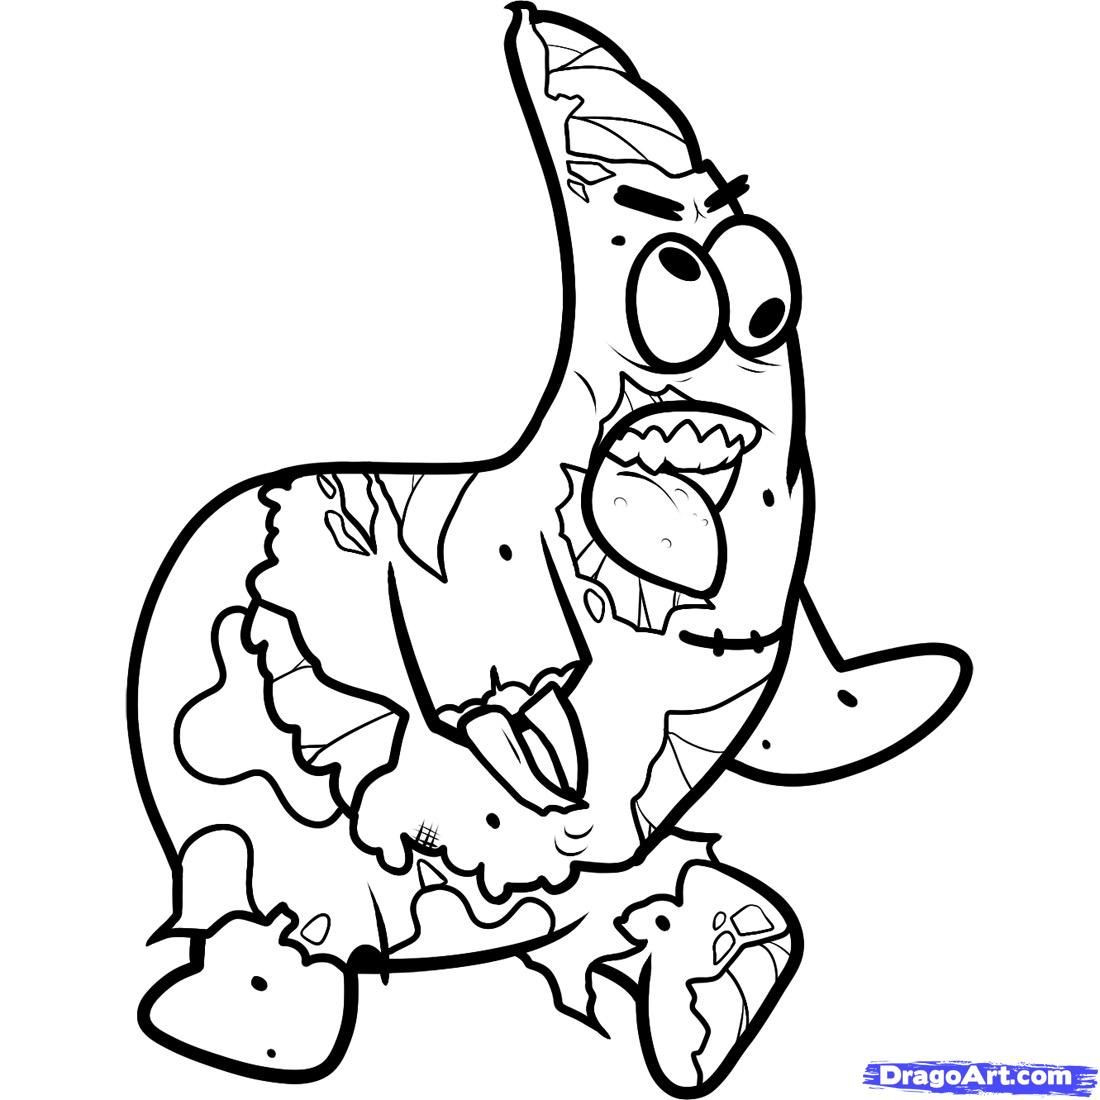 Disney Zombies Coloring Pages
 11 Pics of Easy Zombie Coloring Page Zombie Spongebob